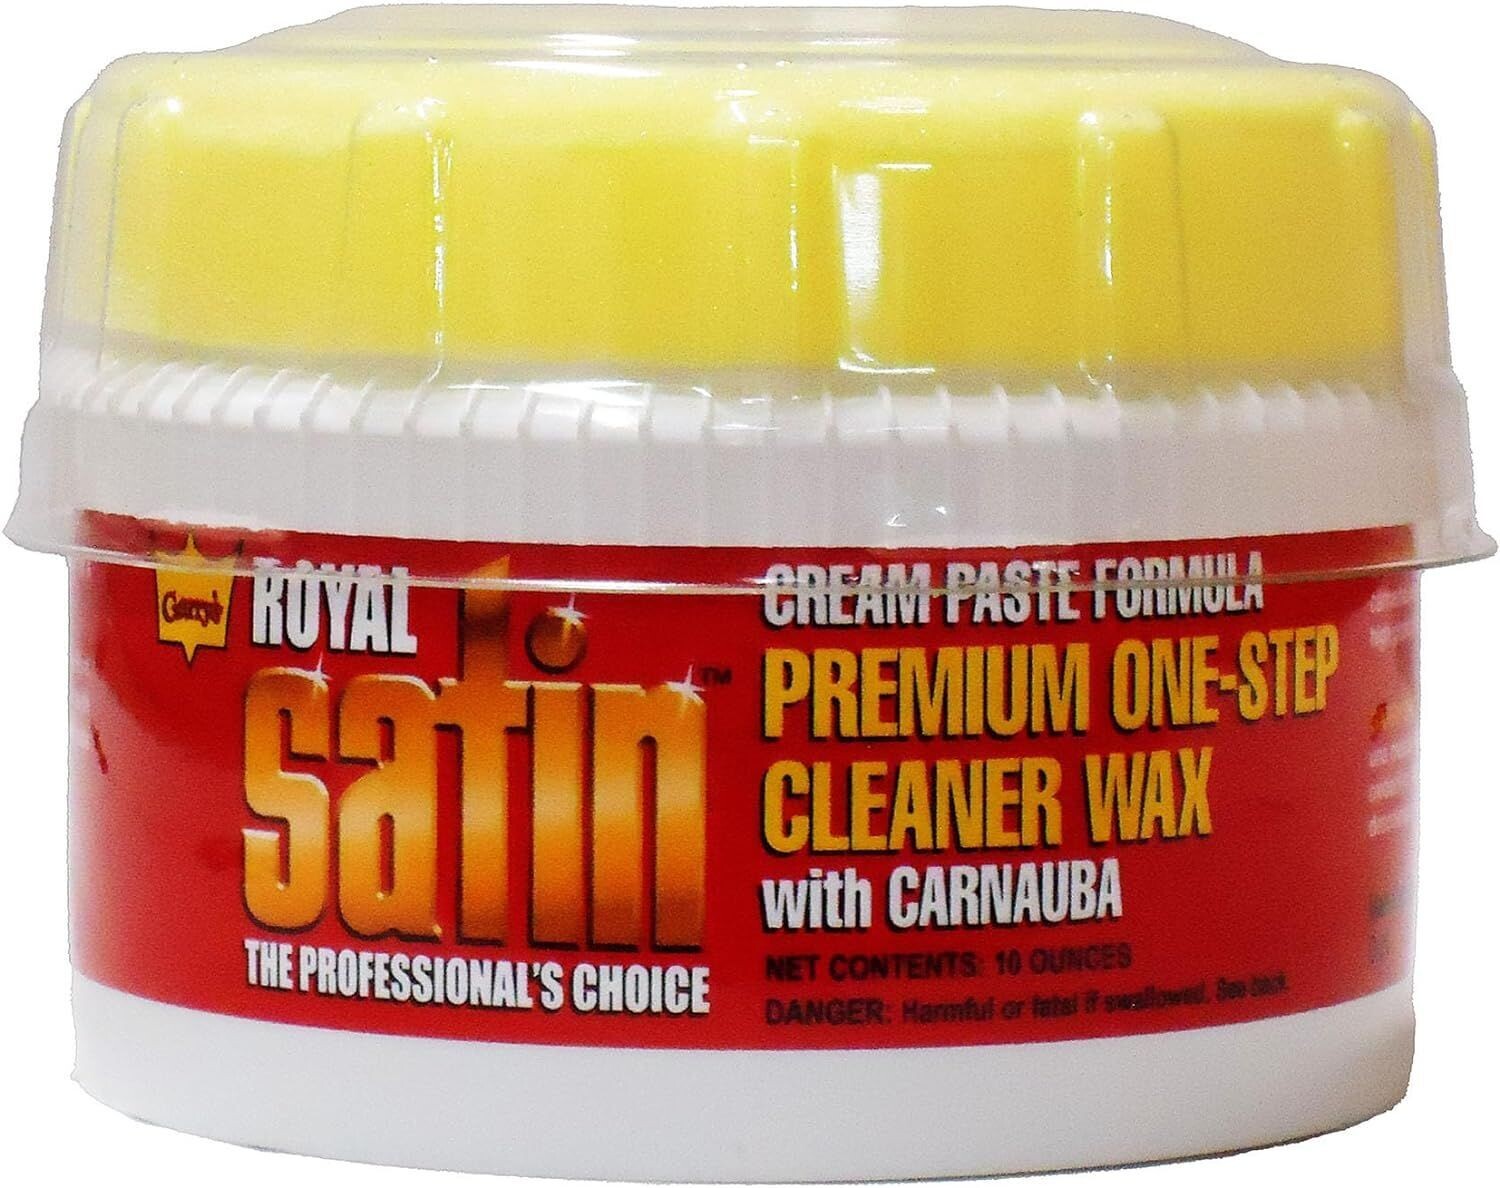 Garry's Royal Satin One Step Cleaner Wax - Deep Clean, Shine, and Protect Your Vehicle's Finish - Car, Truck, Bus - Carnauba/Hydr.